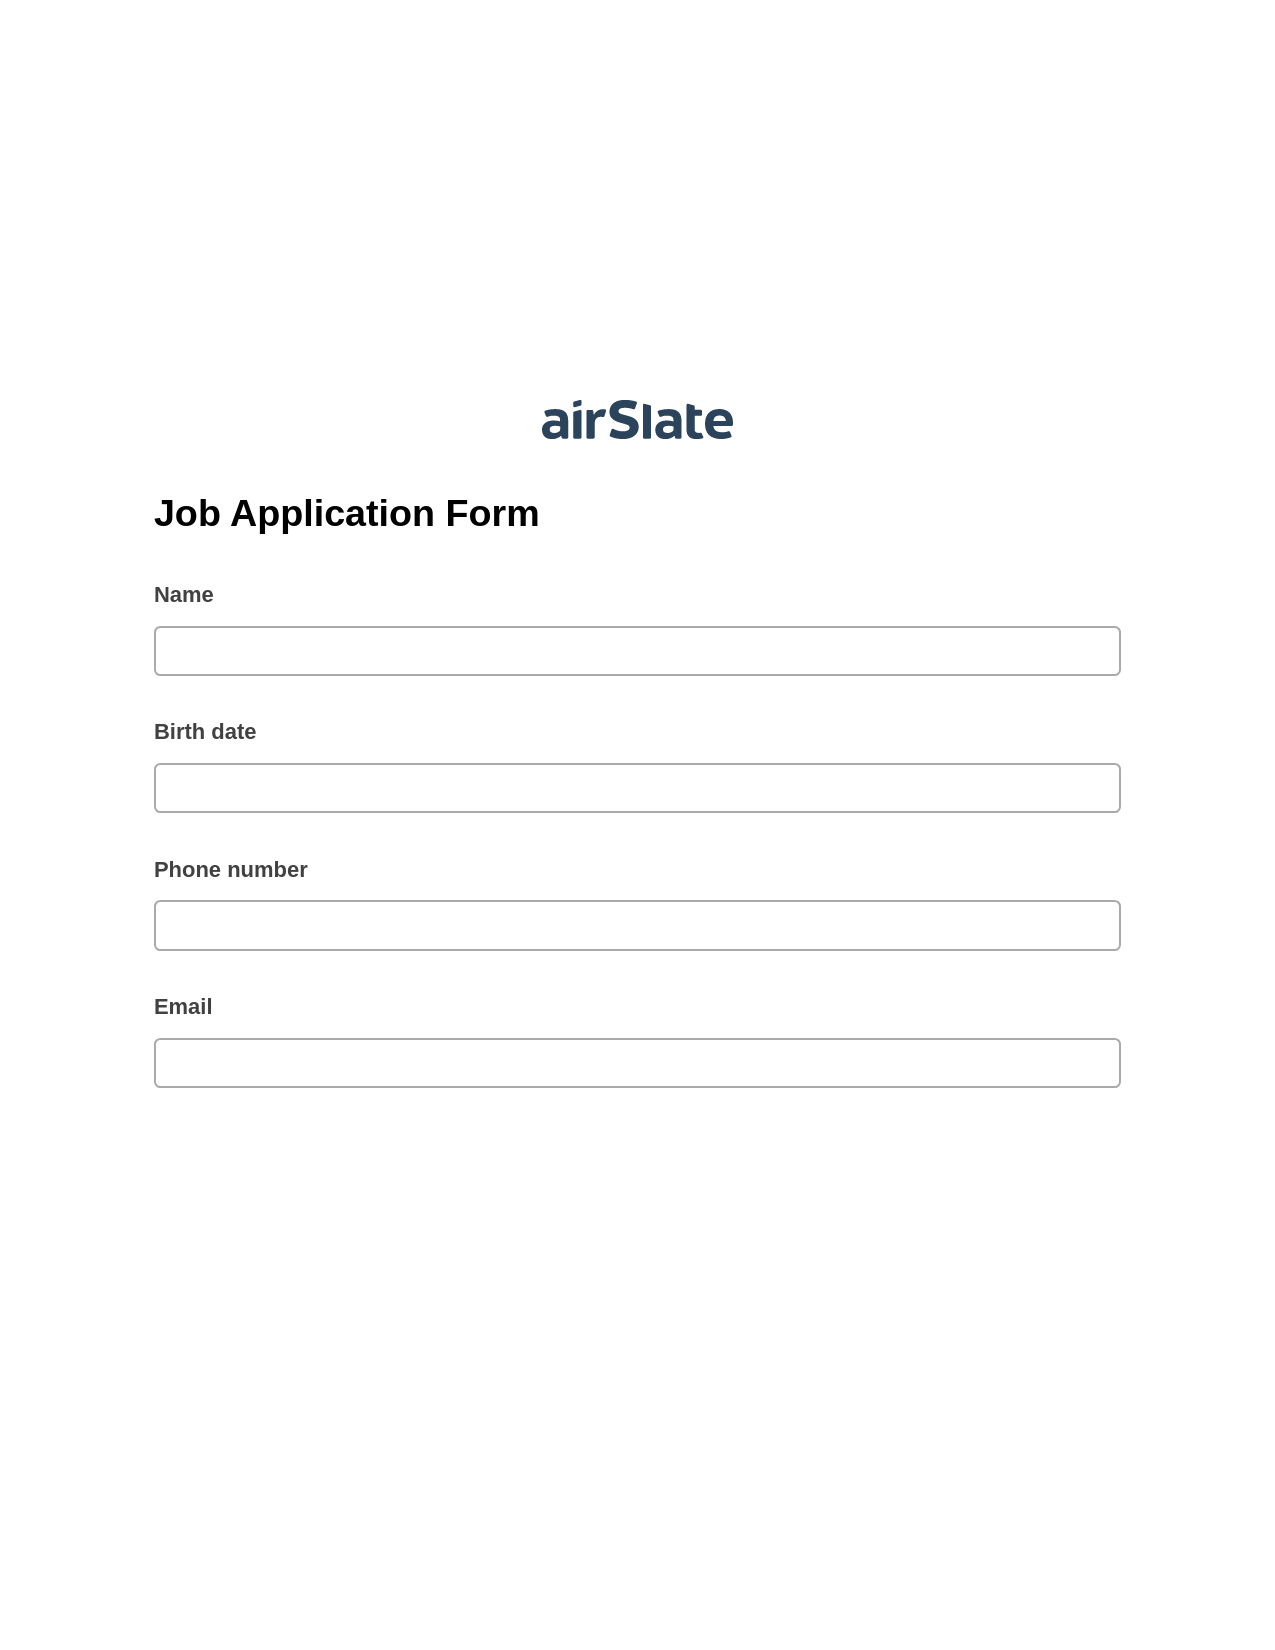 Multirole Job Application Form Pre-fill from CSV File Bot, Create Slate from another Flow Bot, Export to Salesforce Bot